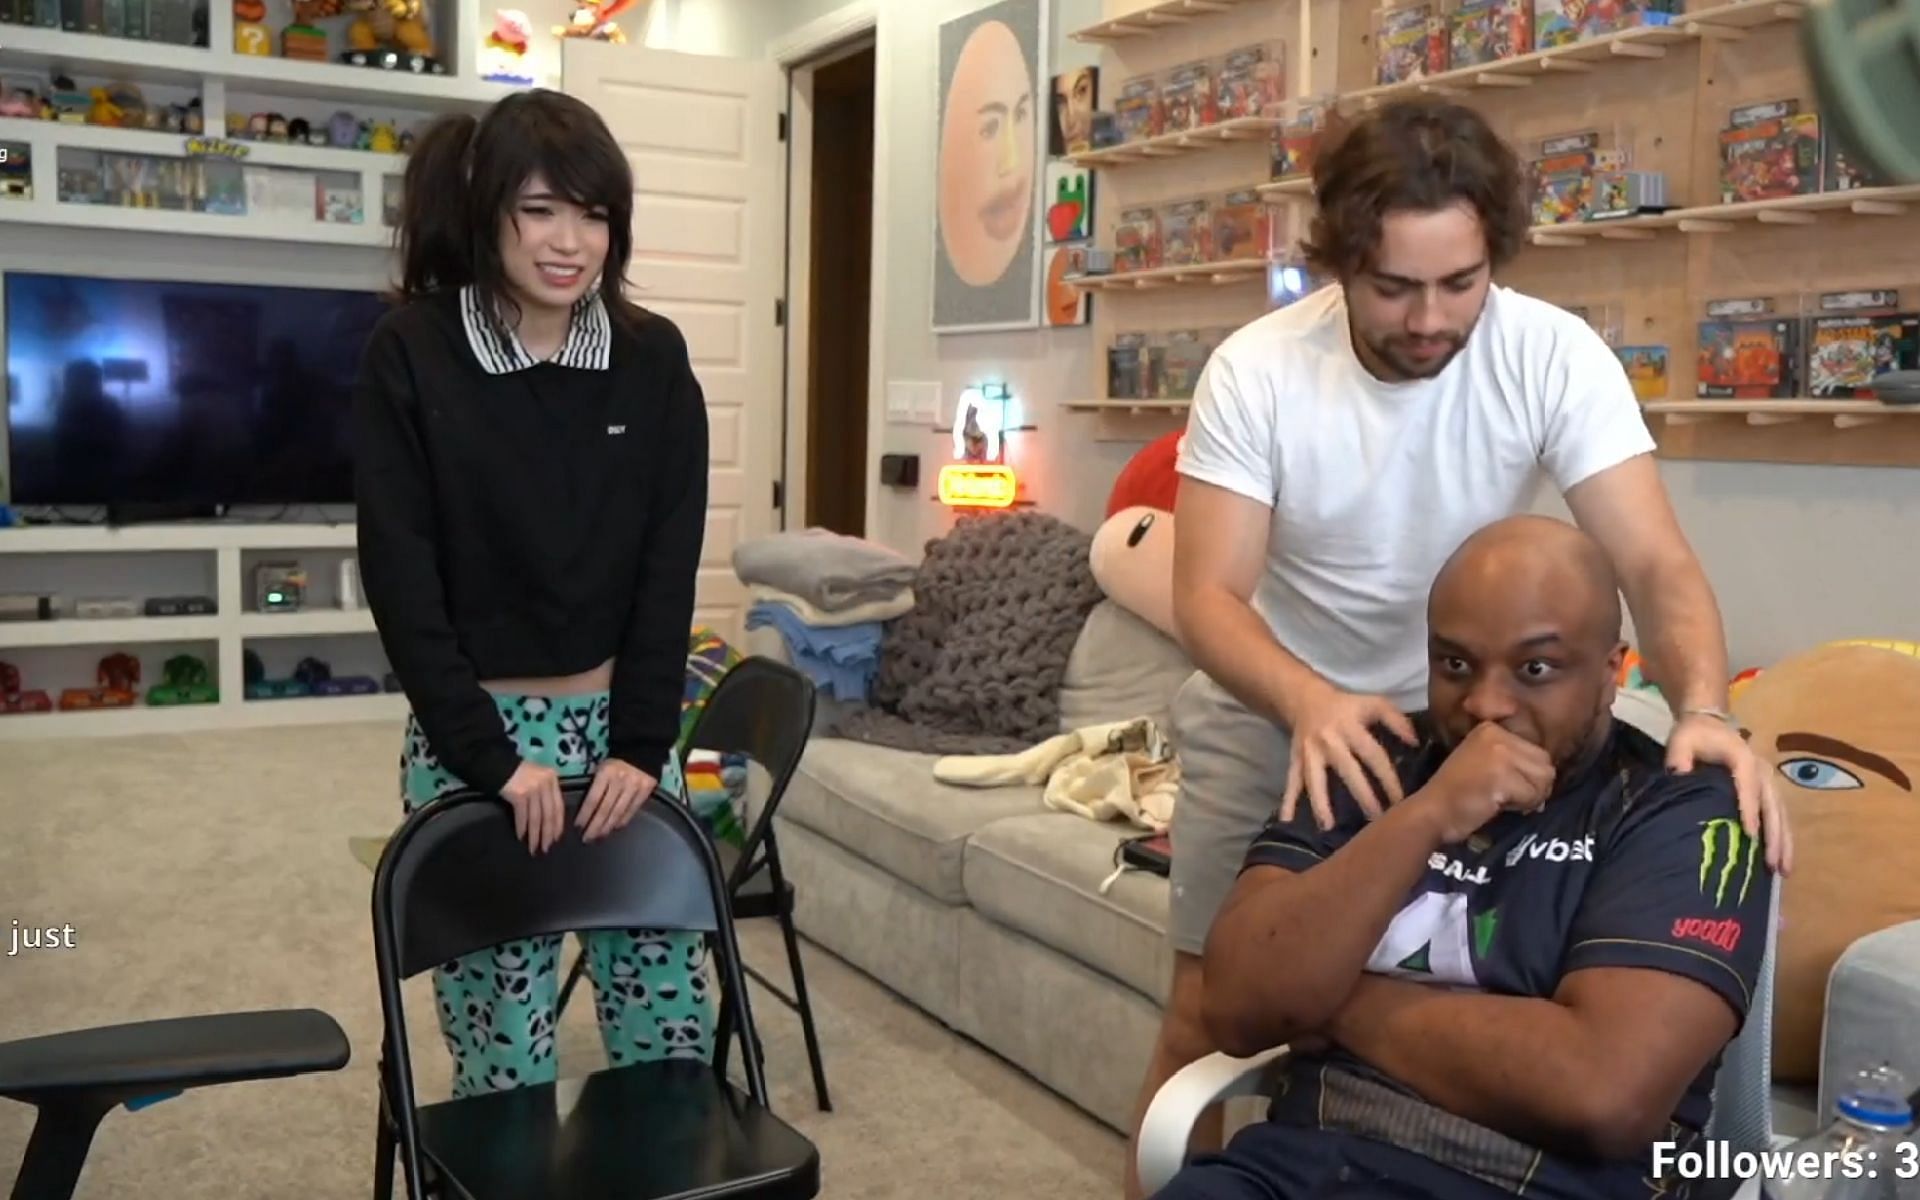 Twitch streamers struggle to contain themselves after consuming the hot sauce on stream (Image via Mizkif/Twitch)